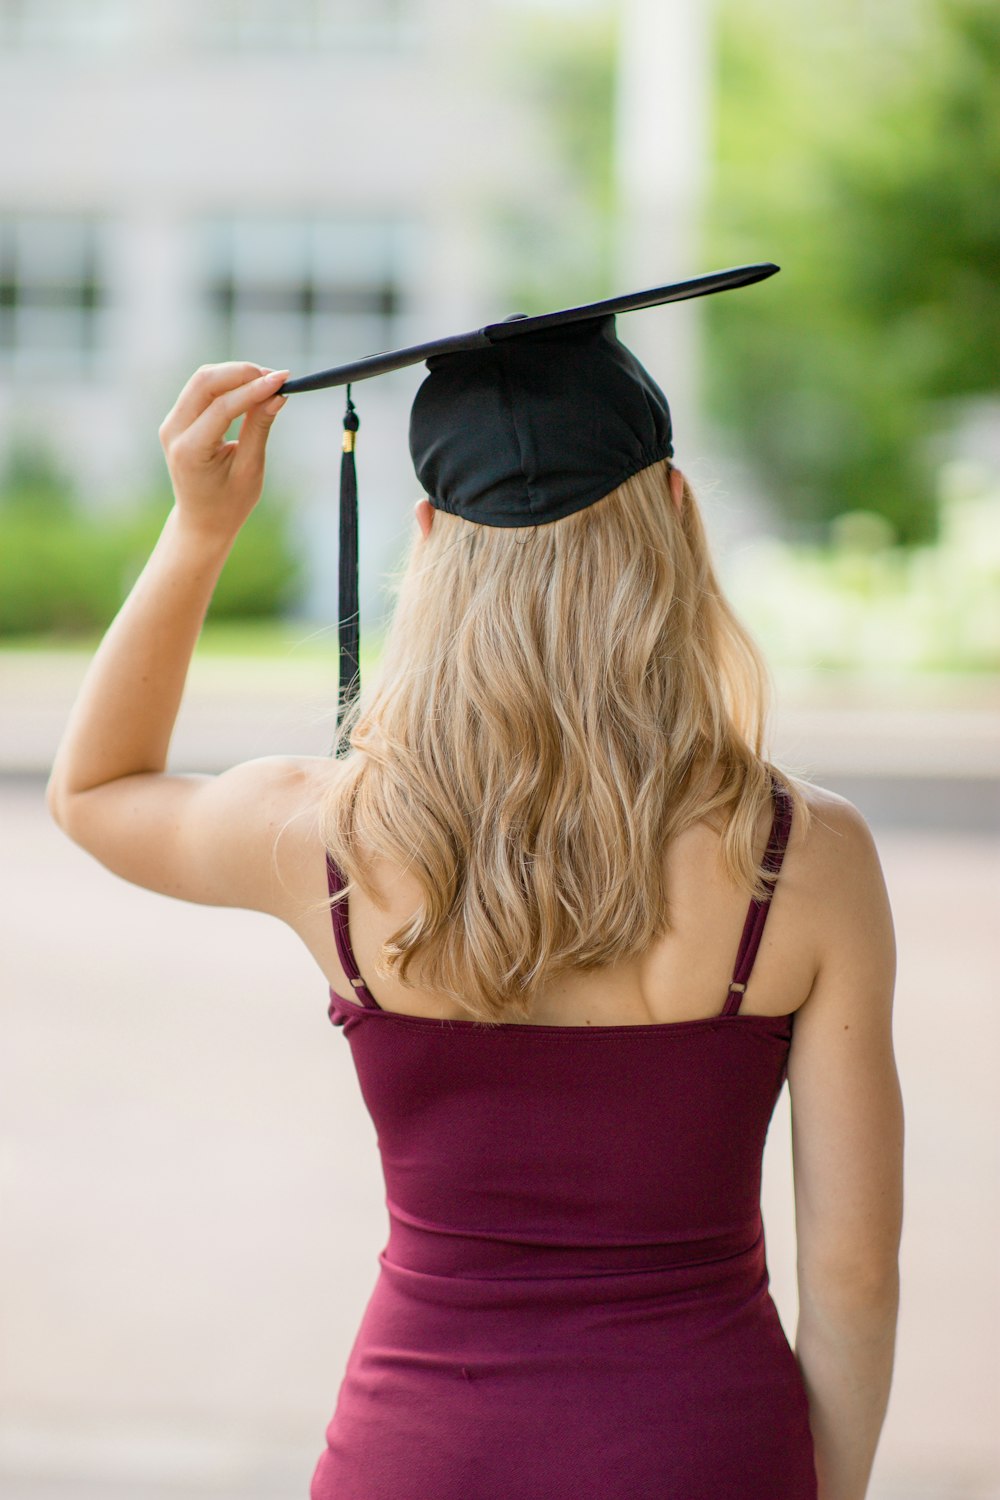 woman in red spaghetti strap top holding black mortar board during daytime